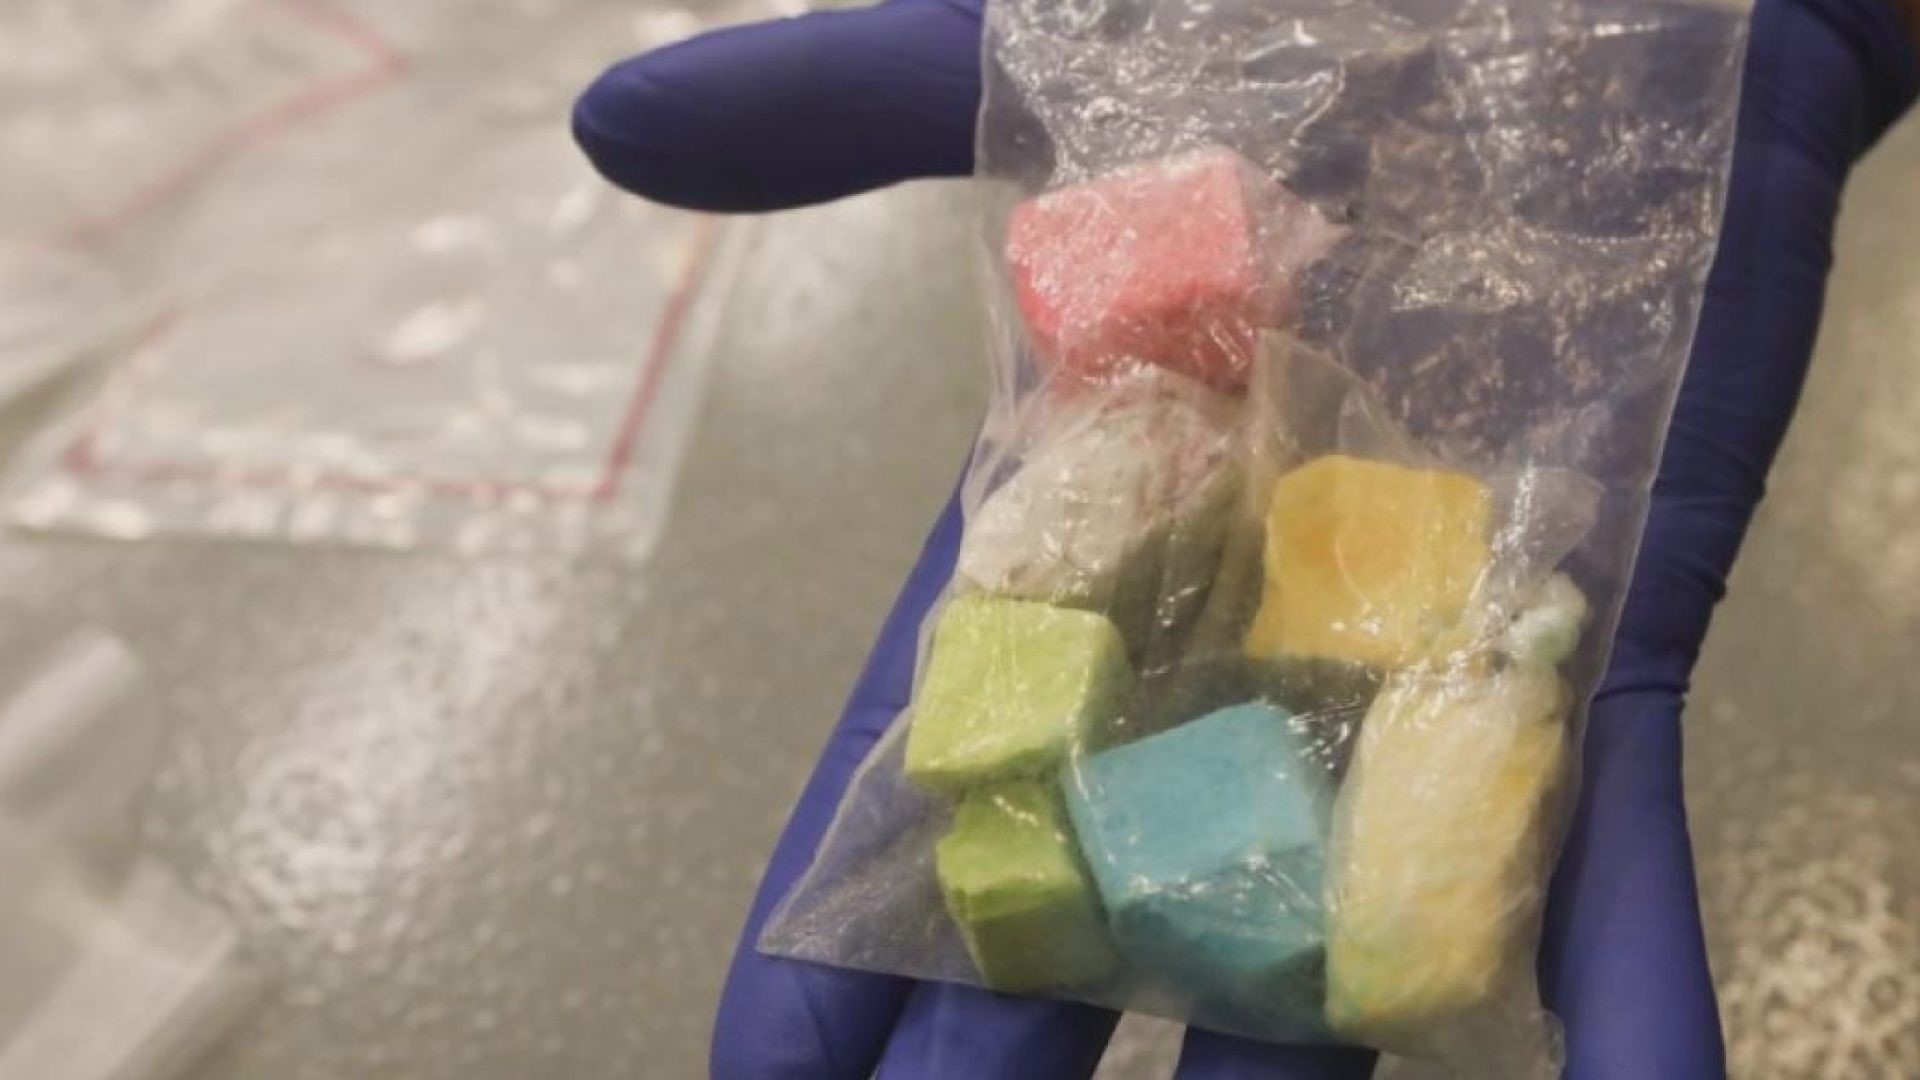 Fentanyl is a synthetic opioid that is 50 times more potent than heroin.